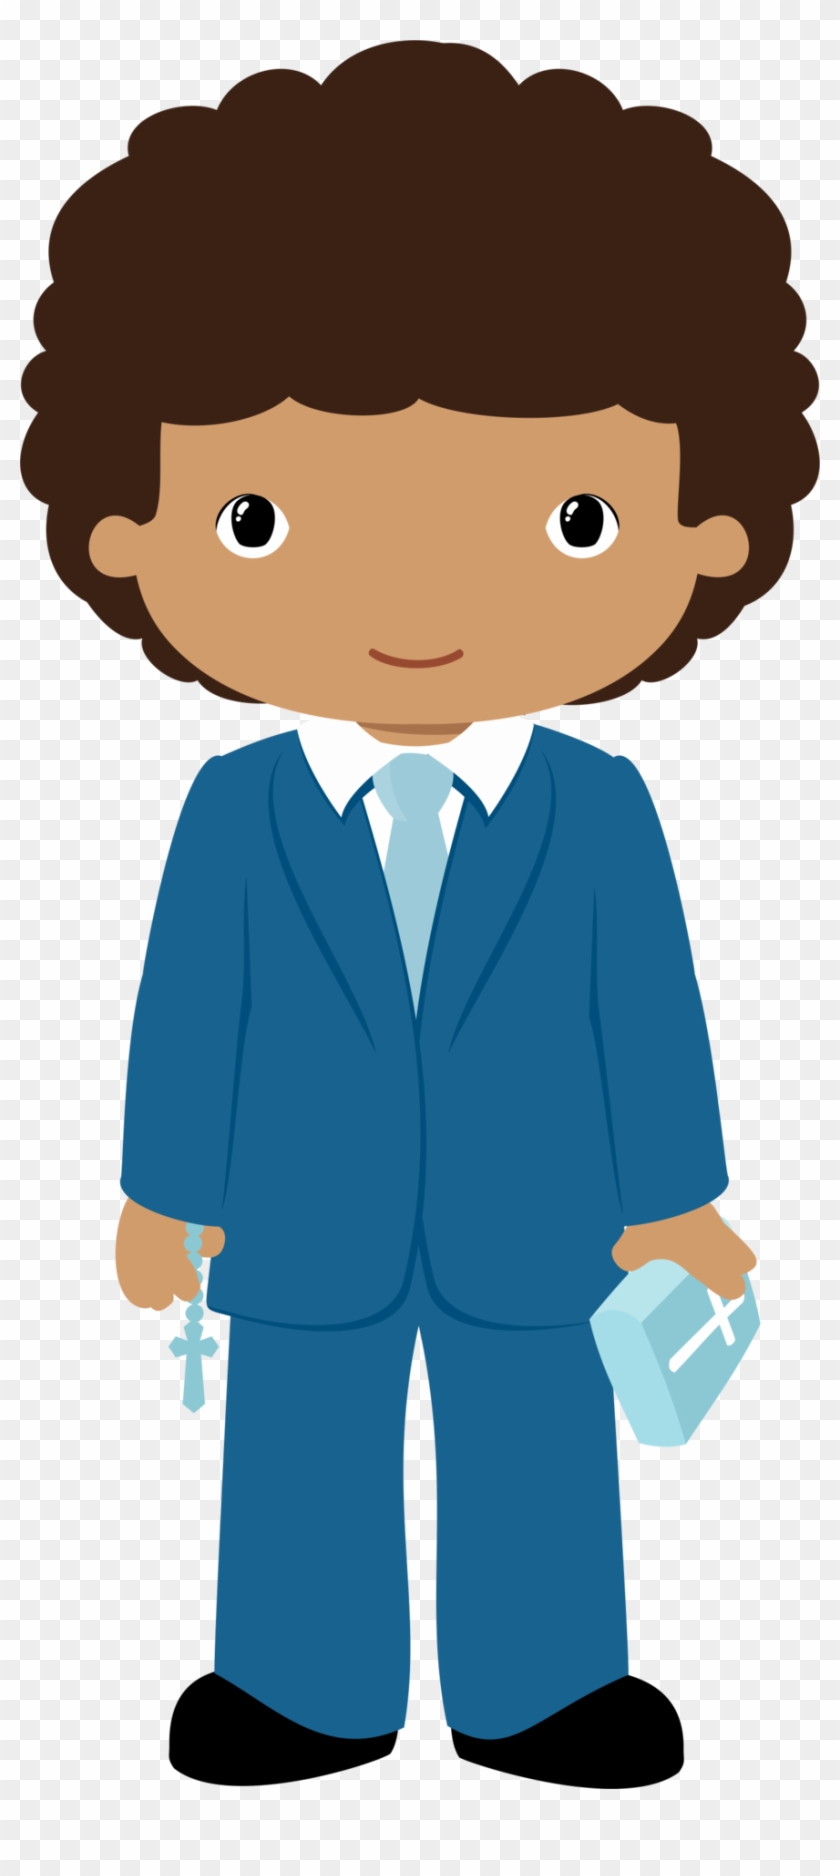 View All Images At Png Folder - Clip Art Communion Boy Png #108791